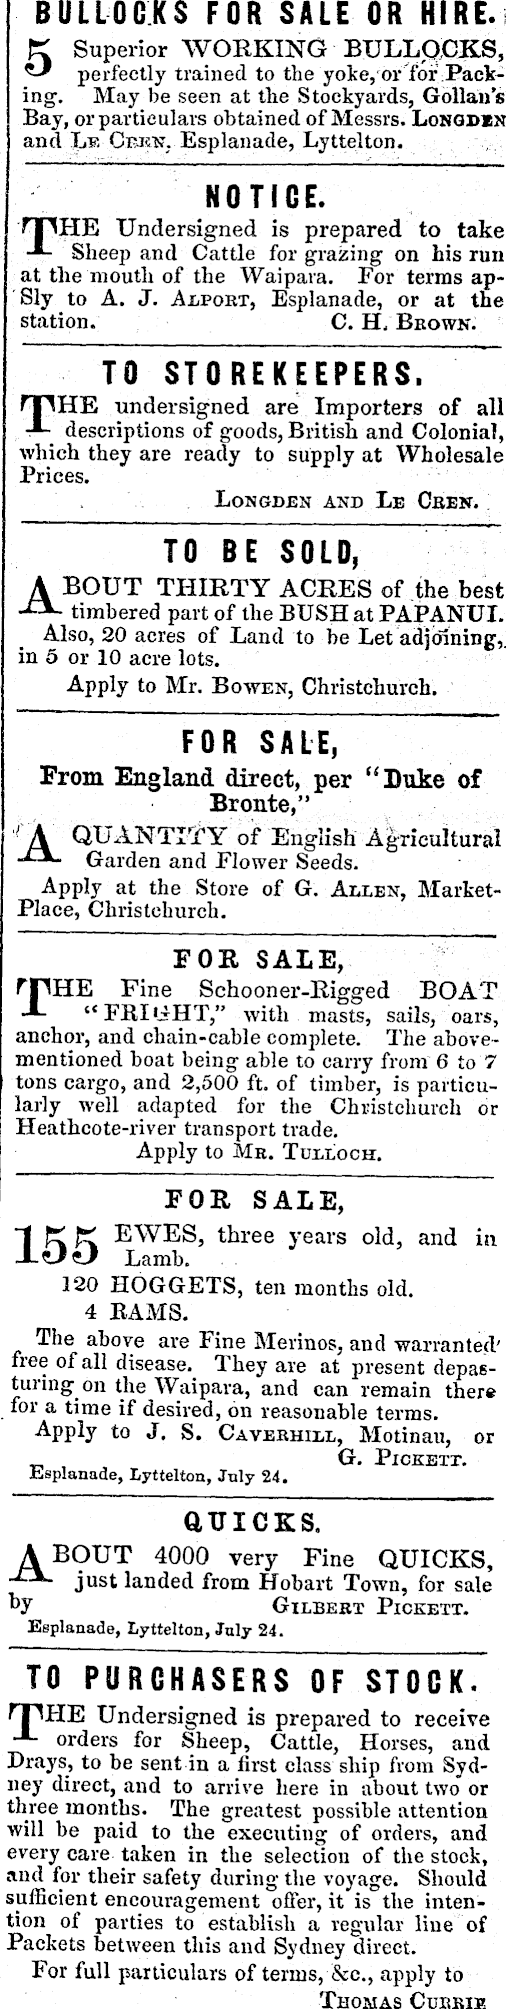 Papers Past Newspapers Lyttelton Times 2 August 1851 Page 1 Advertisements Column 3